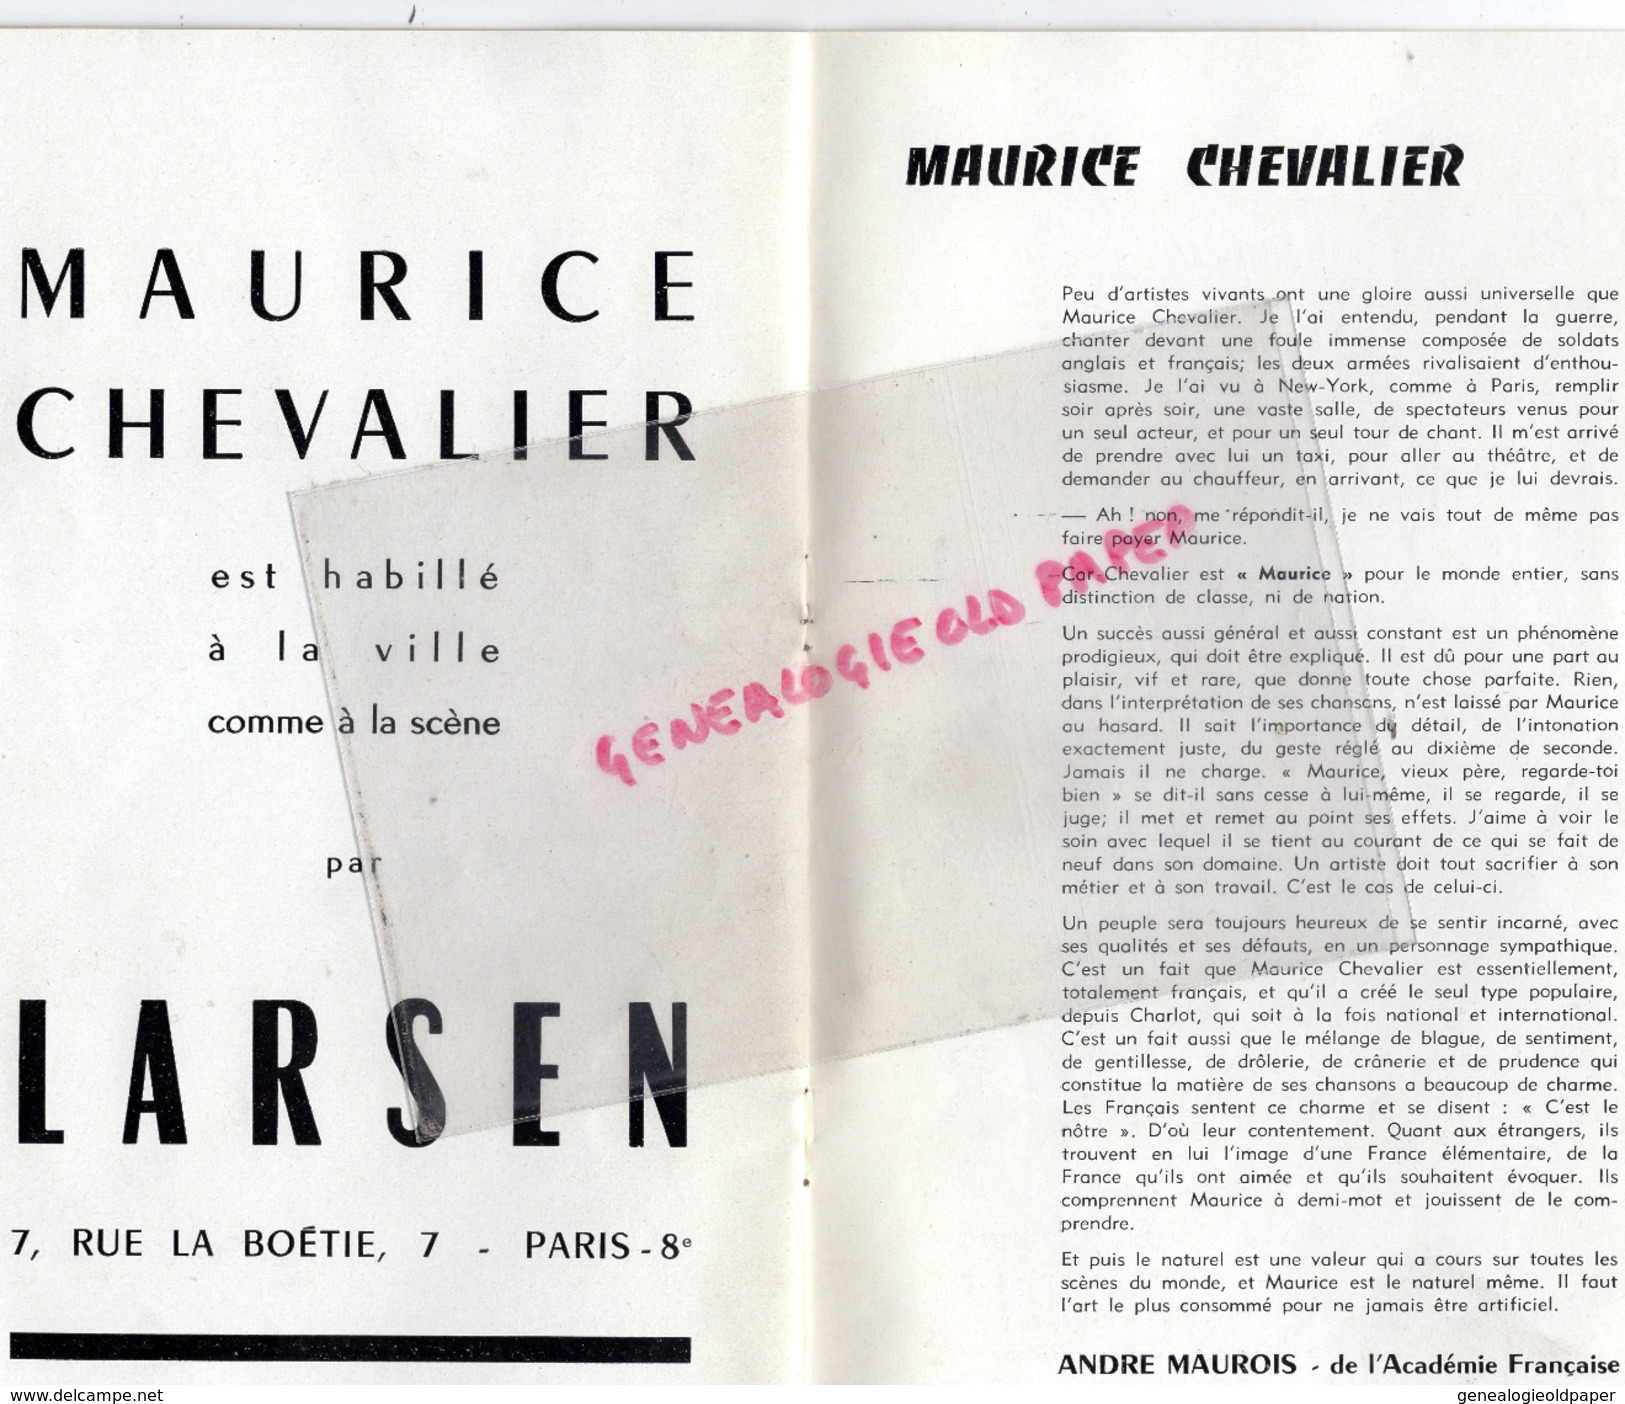 PROGRAMME MAURICE CHEVALIER - PIANO- FRED FREED- THEATRE VARIETES PARIS- DISCOURS SACHA GUITRY-ELVIRE POPESCO-DE MALLET